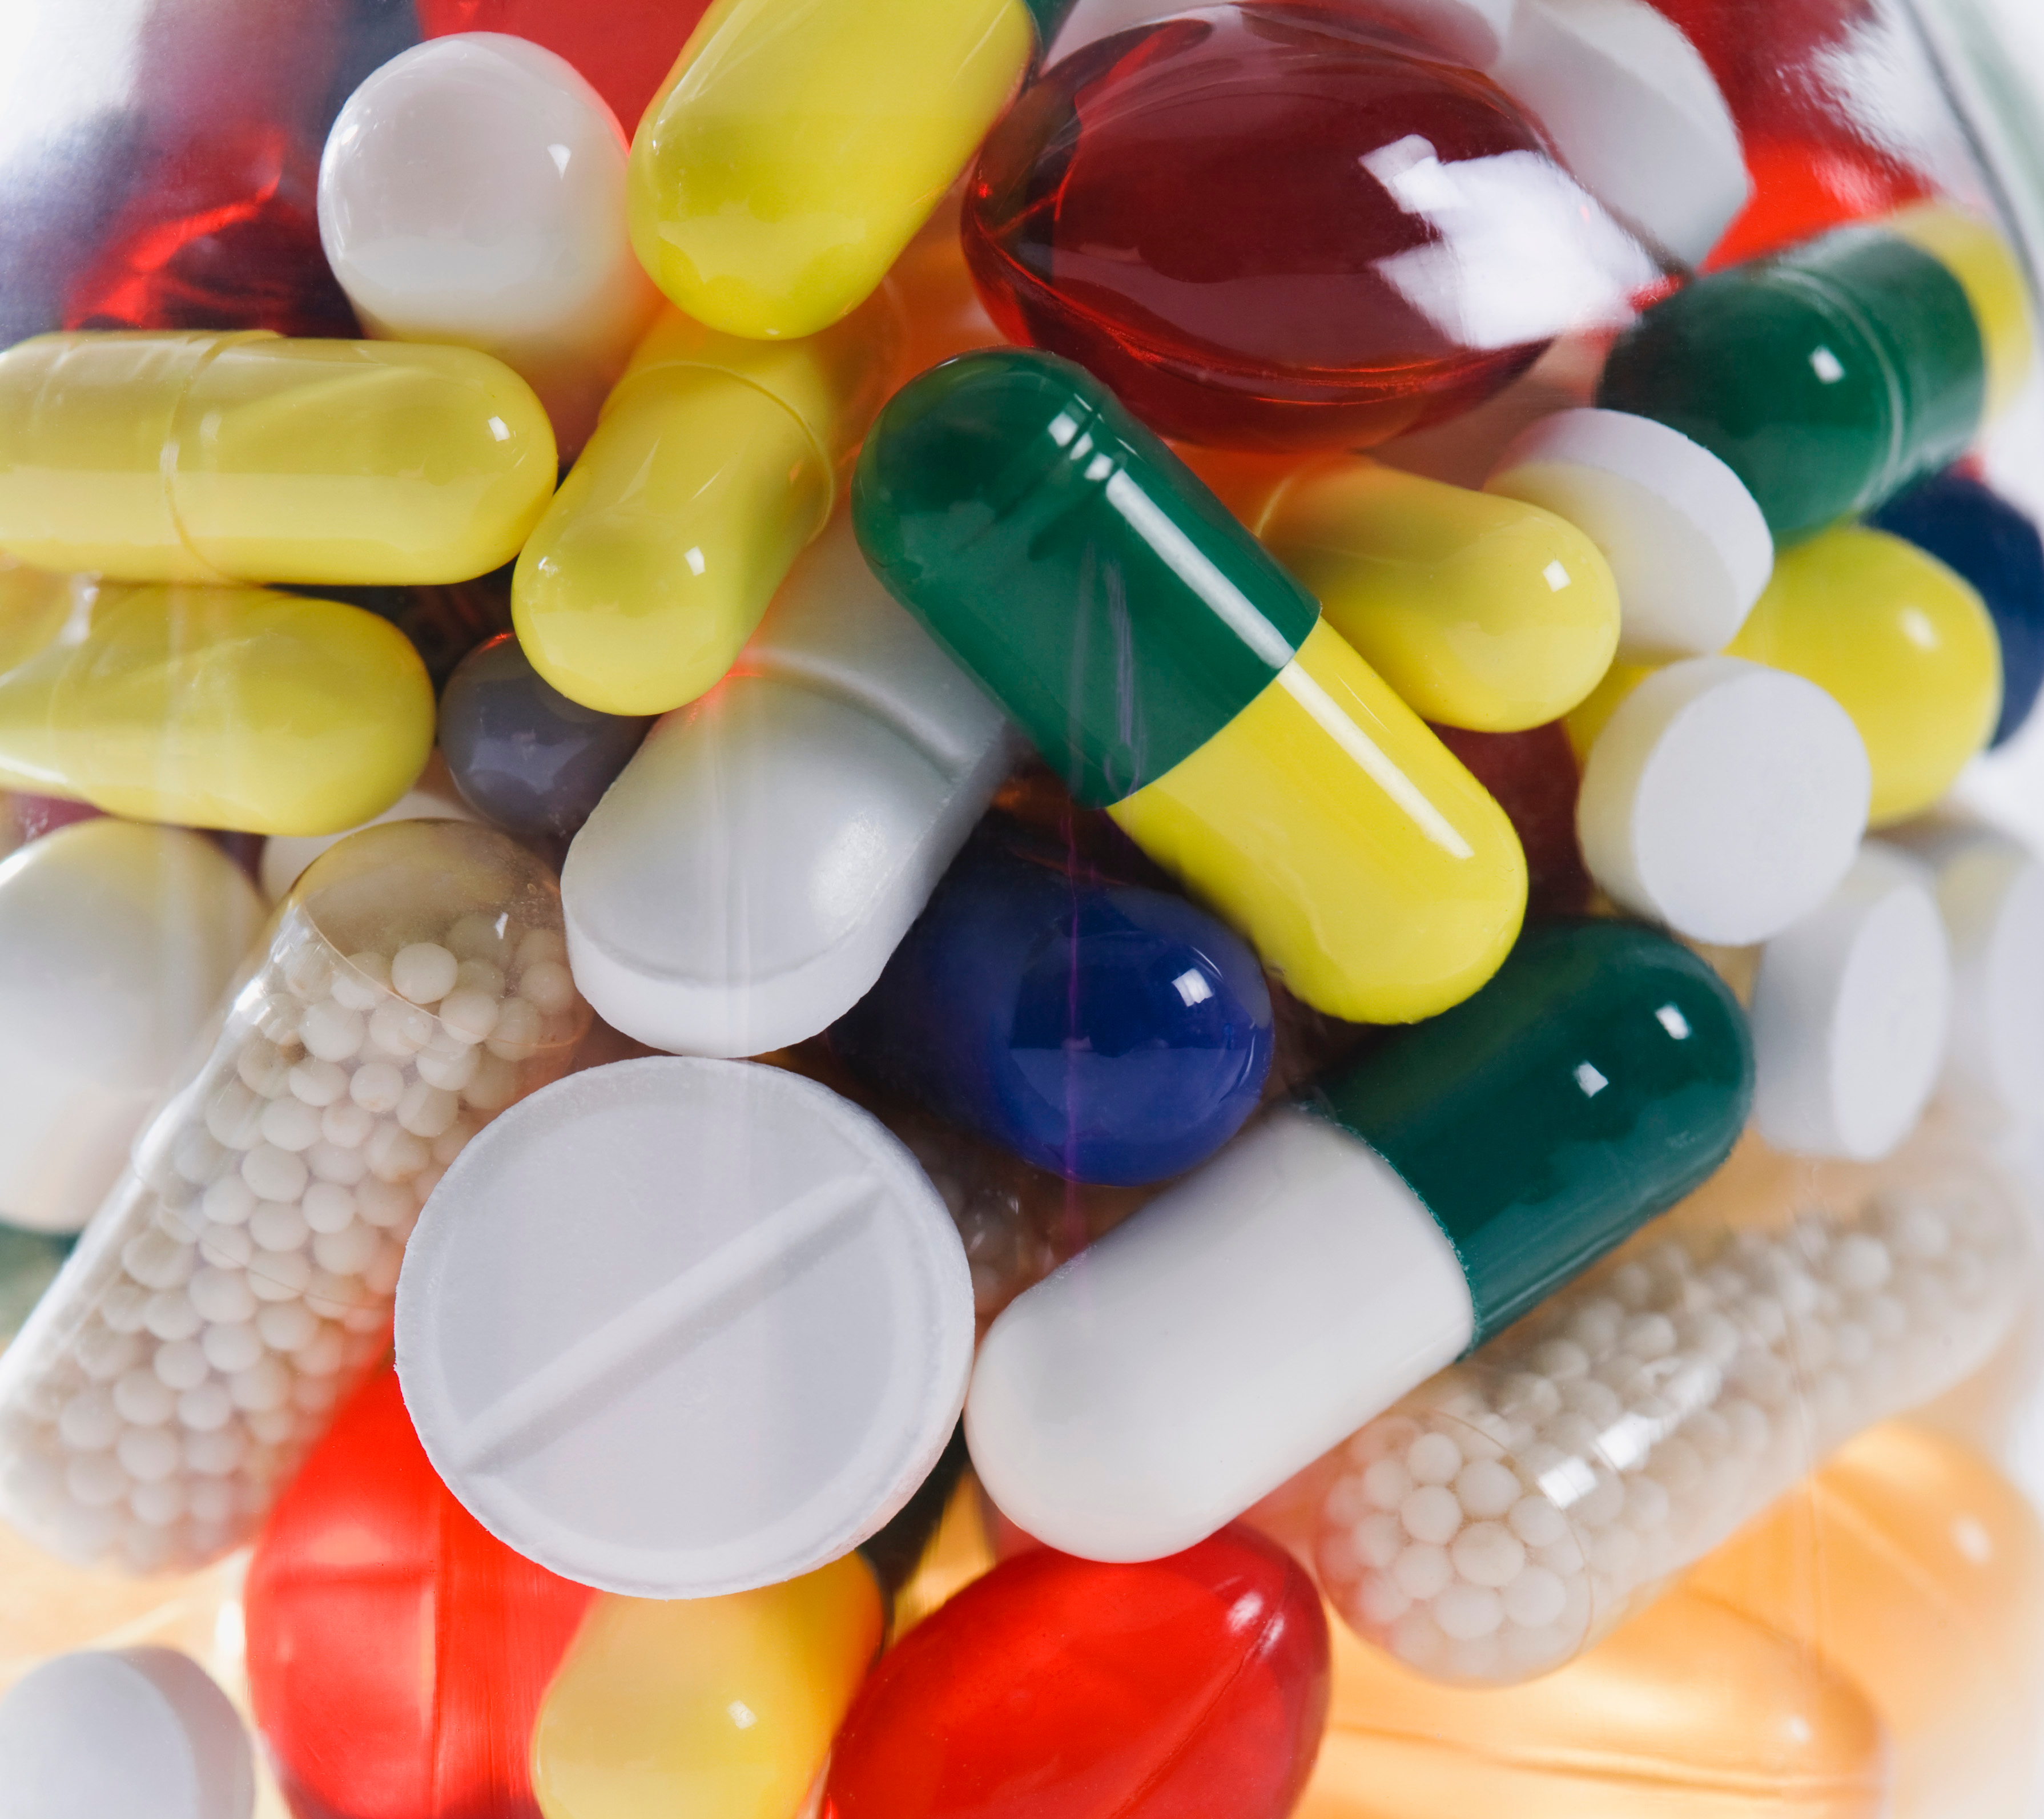 GELATIN CAPSULES - All you need to know